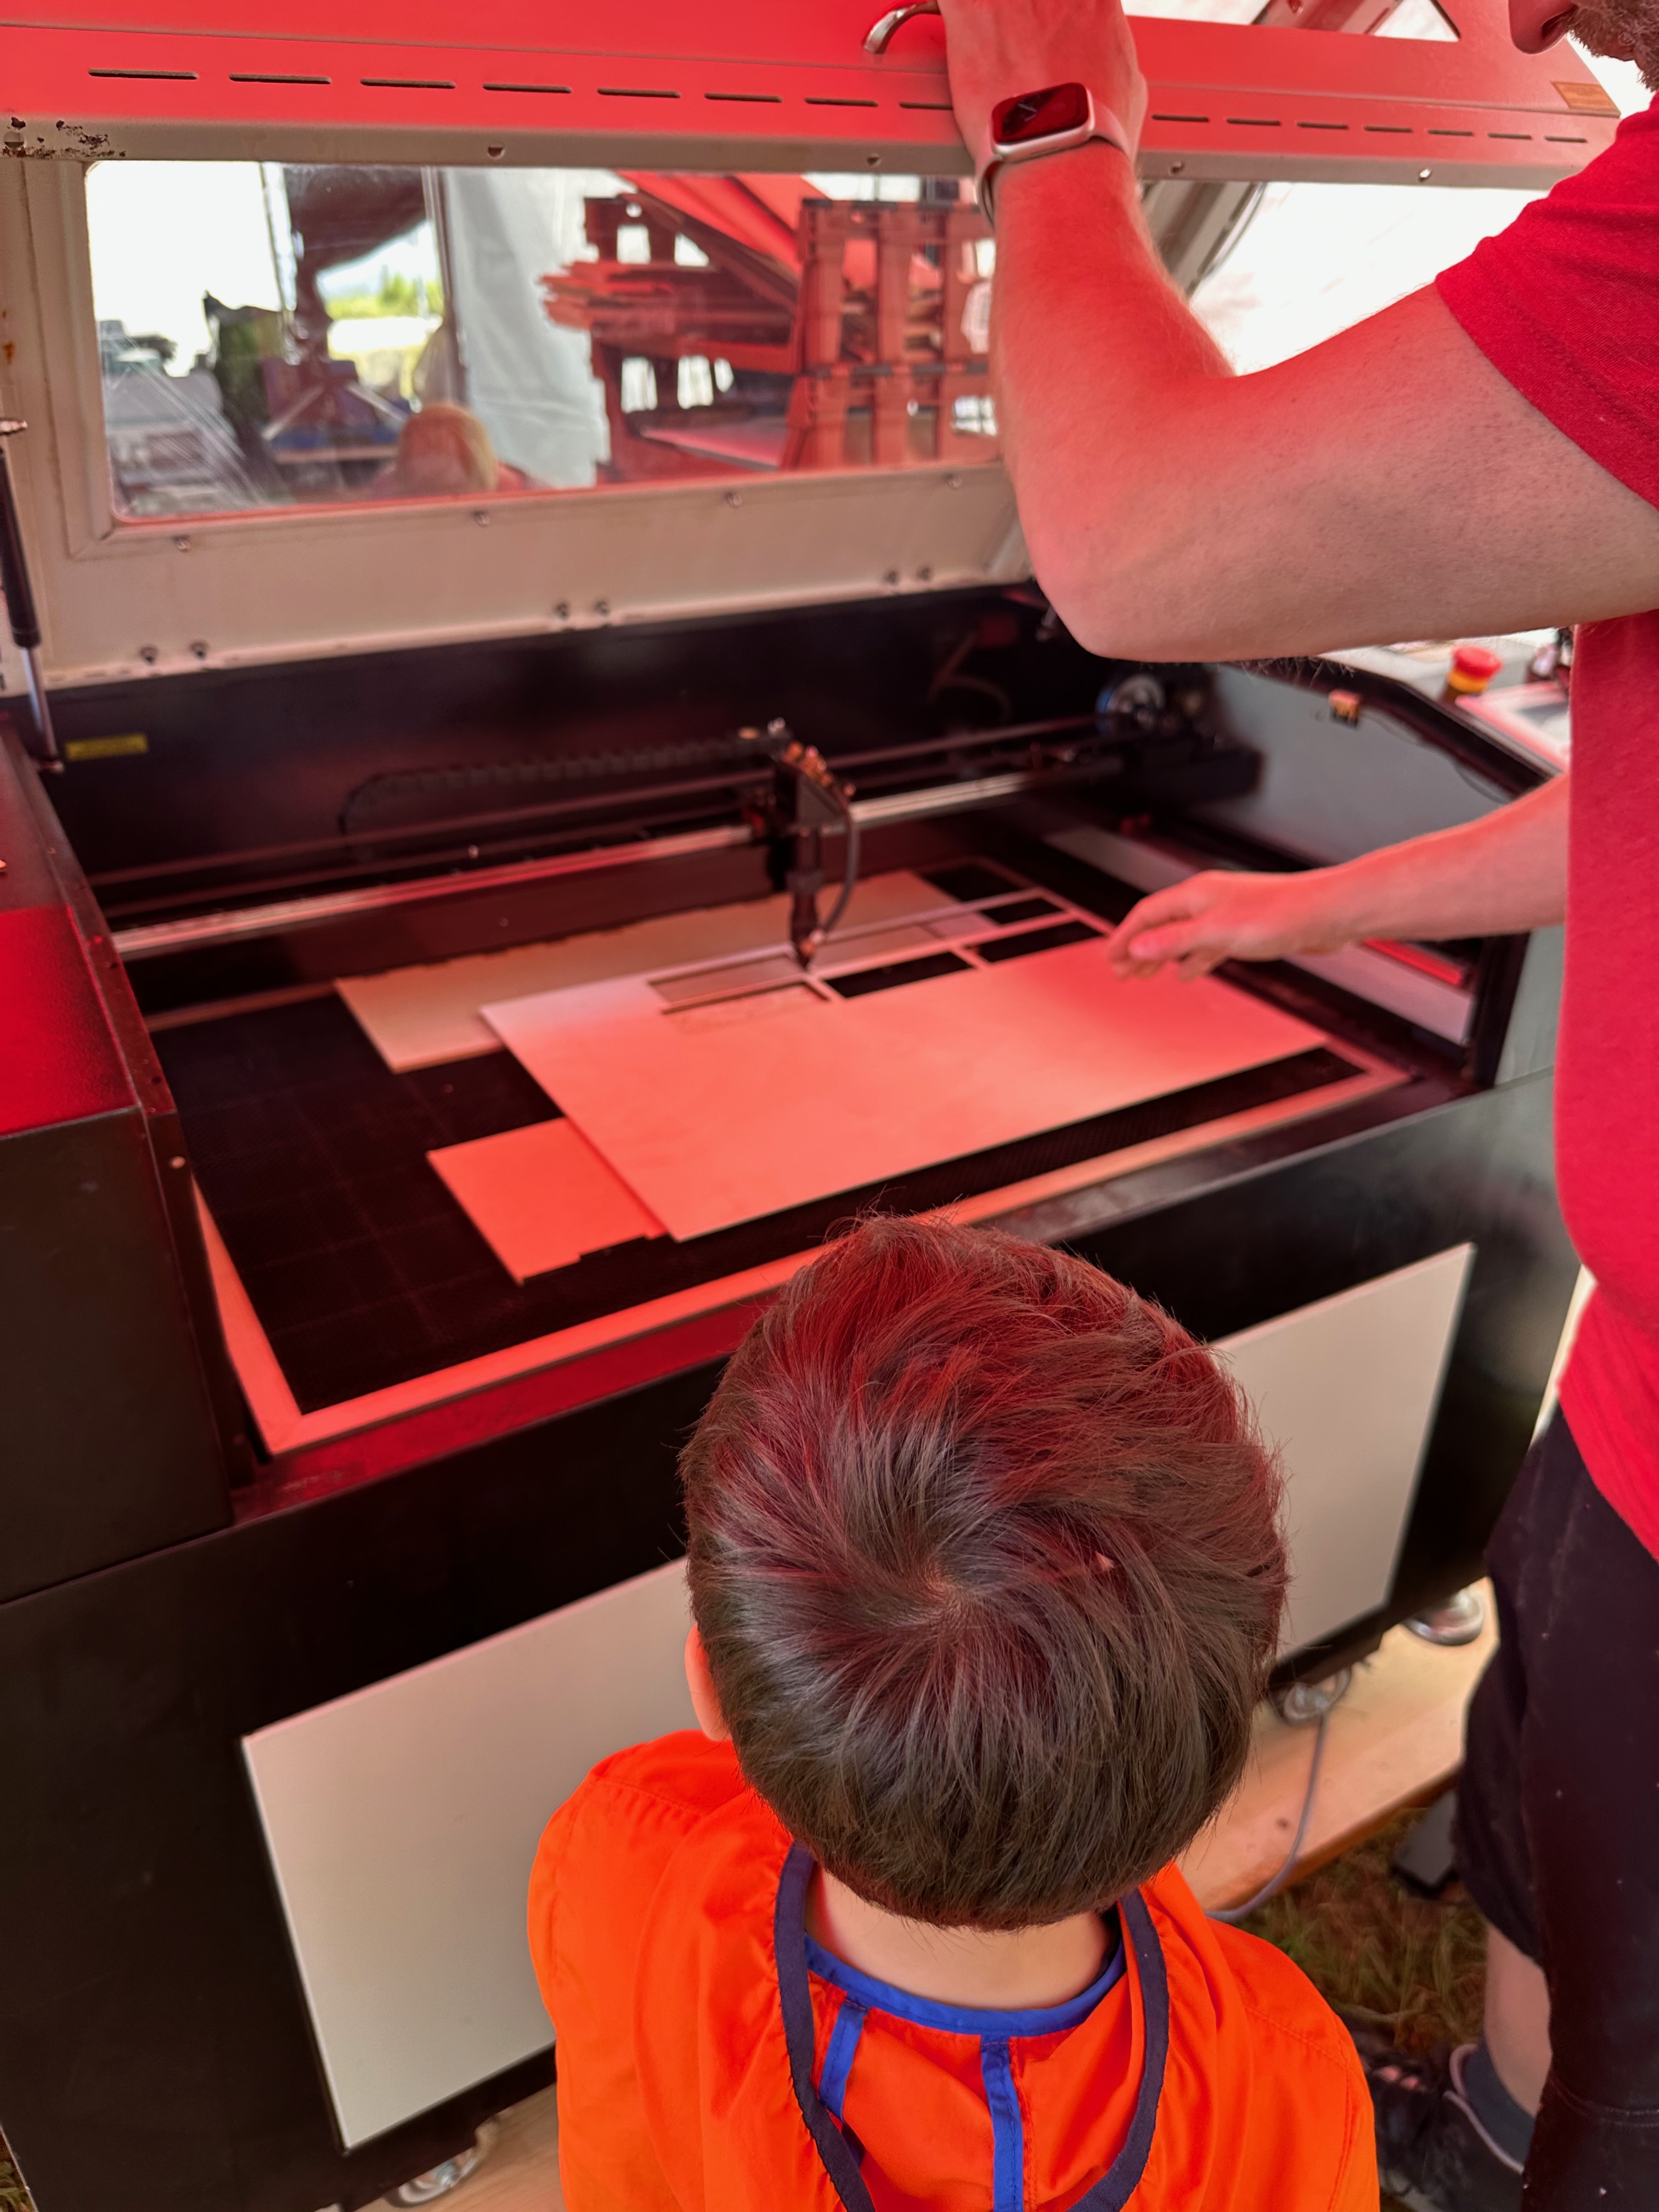 A boy stands looking at a sheet of wood being loaded into a laser cutter.